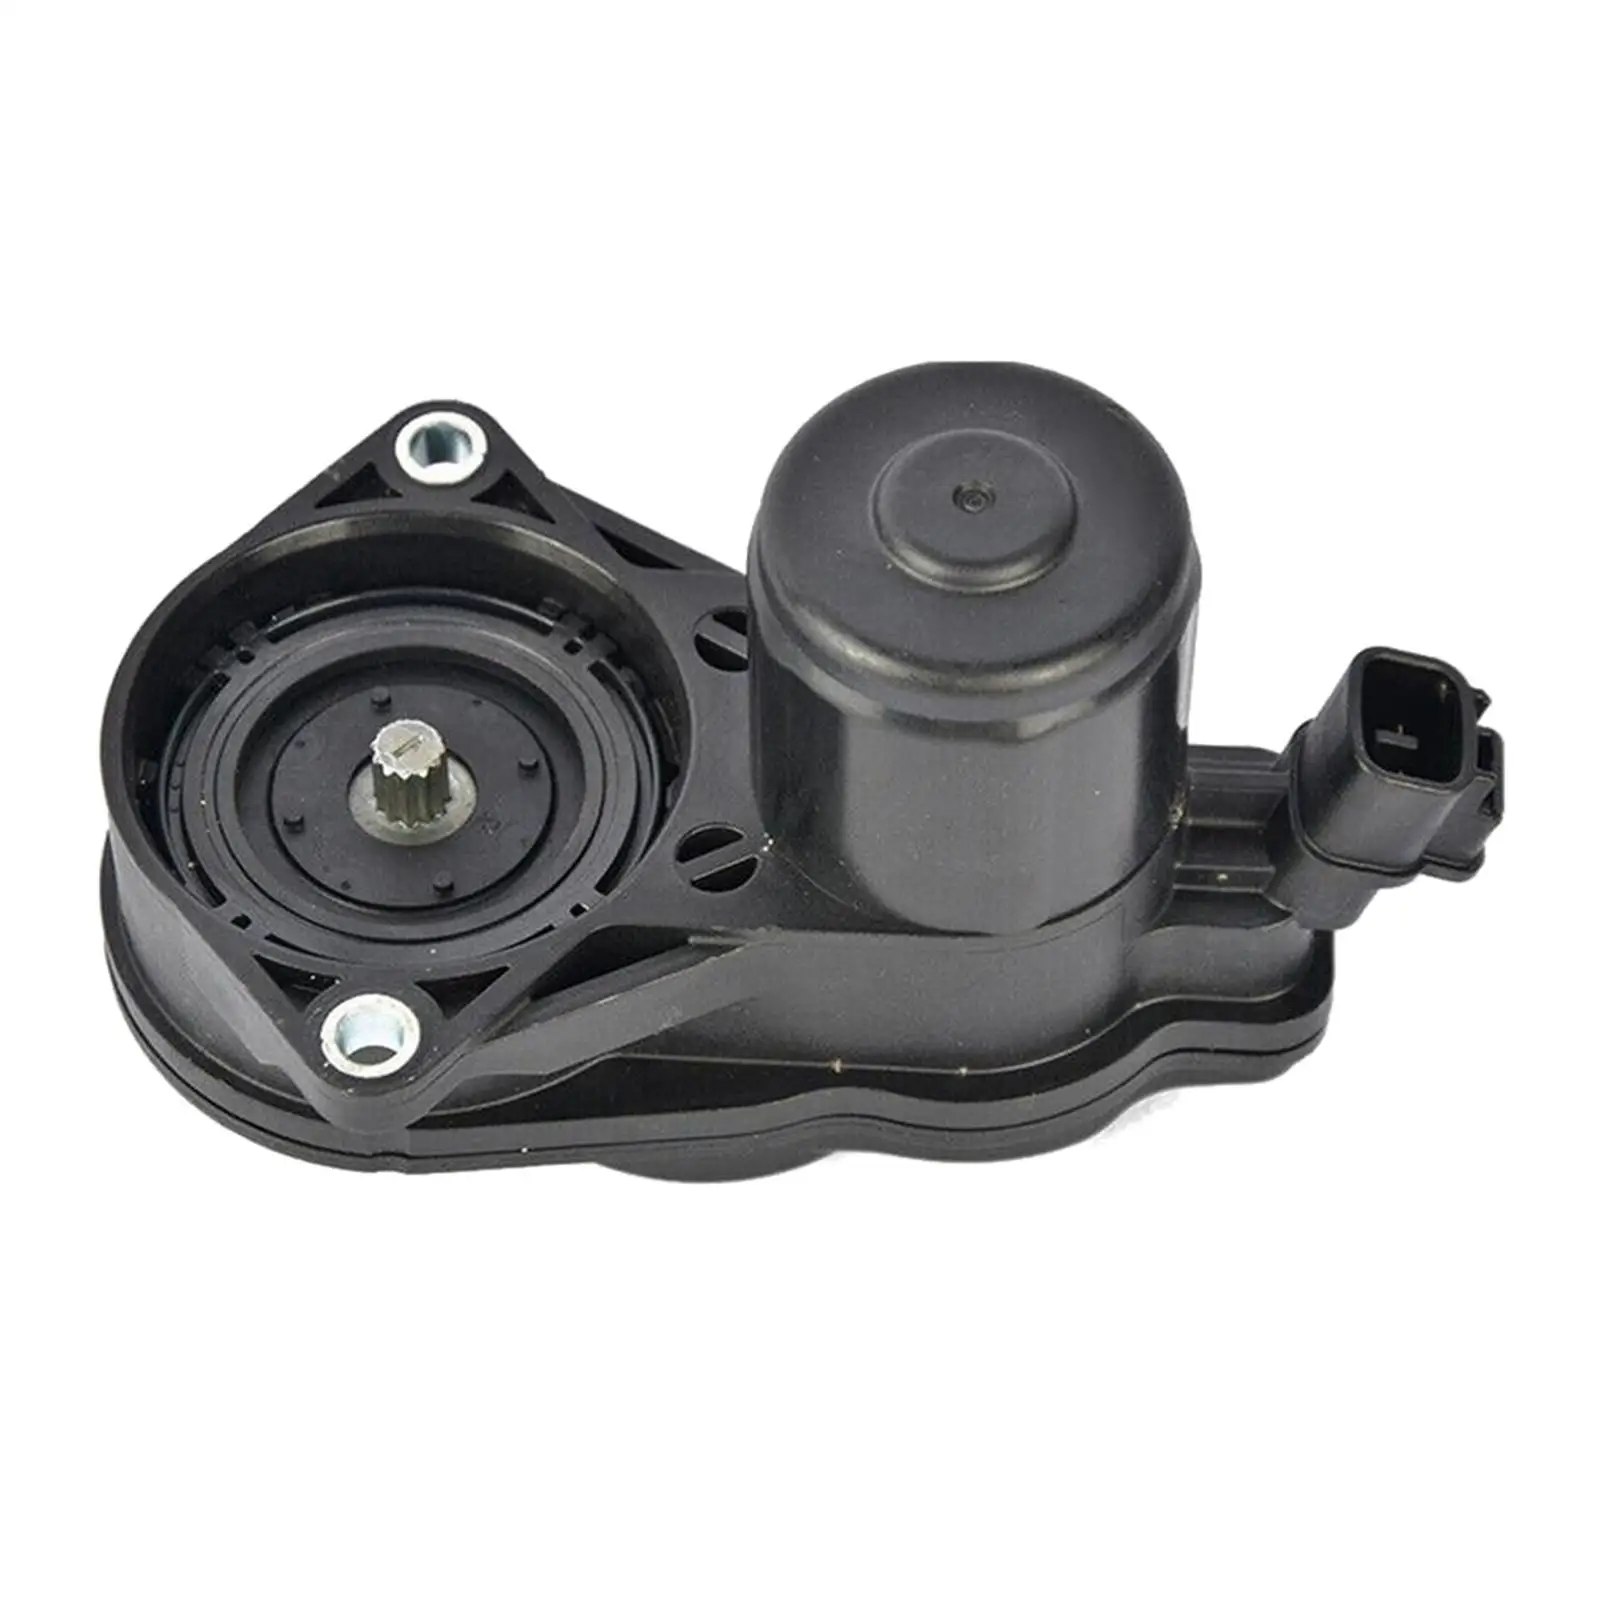 Parking Brake Actuator Assembly Car Accessories 46310-33010 Replaces for Toyota Avalon Corolla Hatchback for c-hr